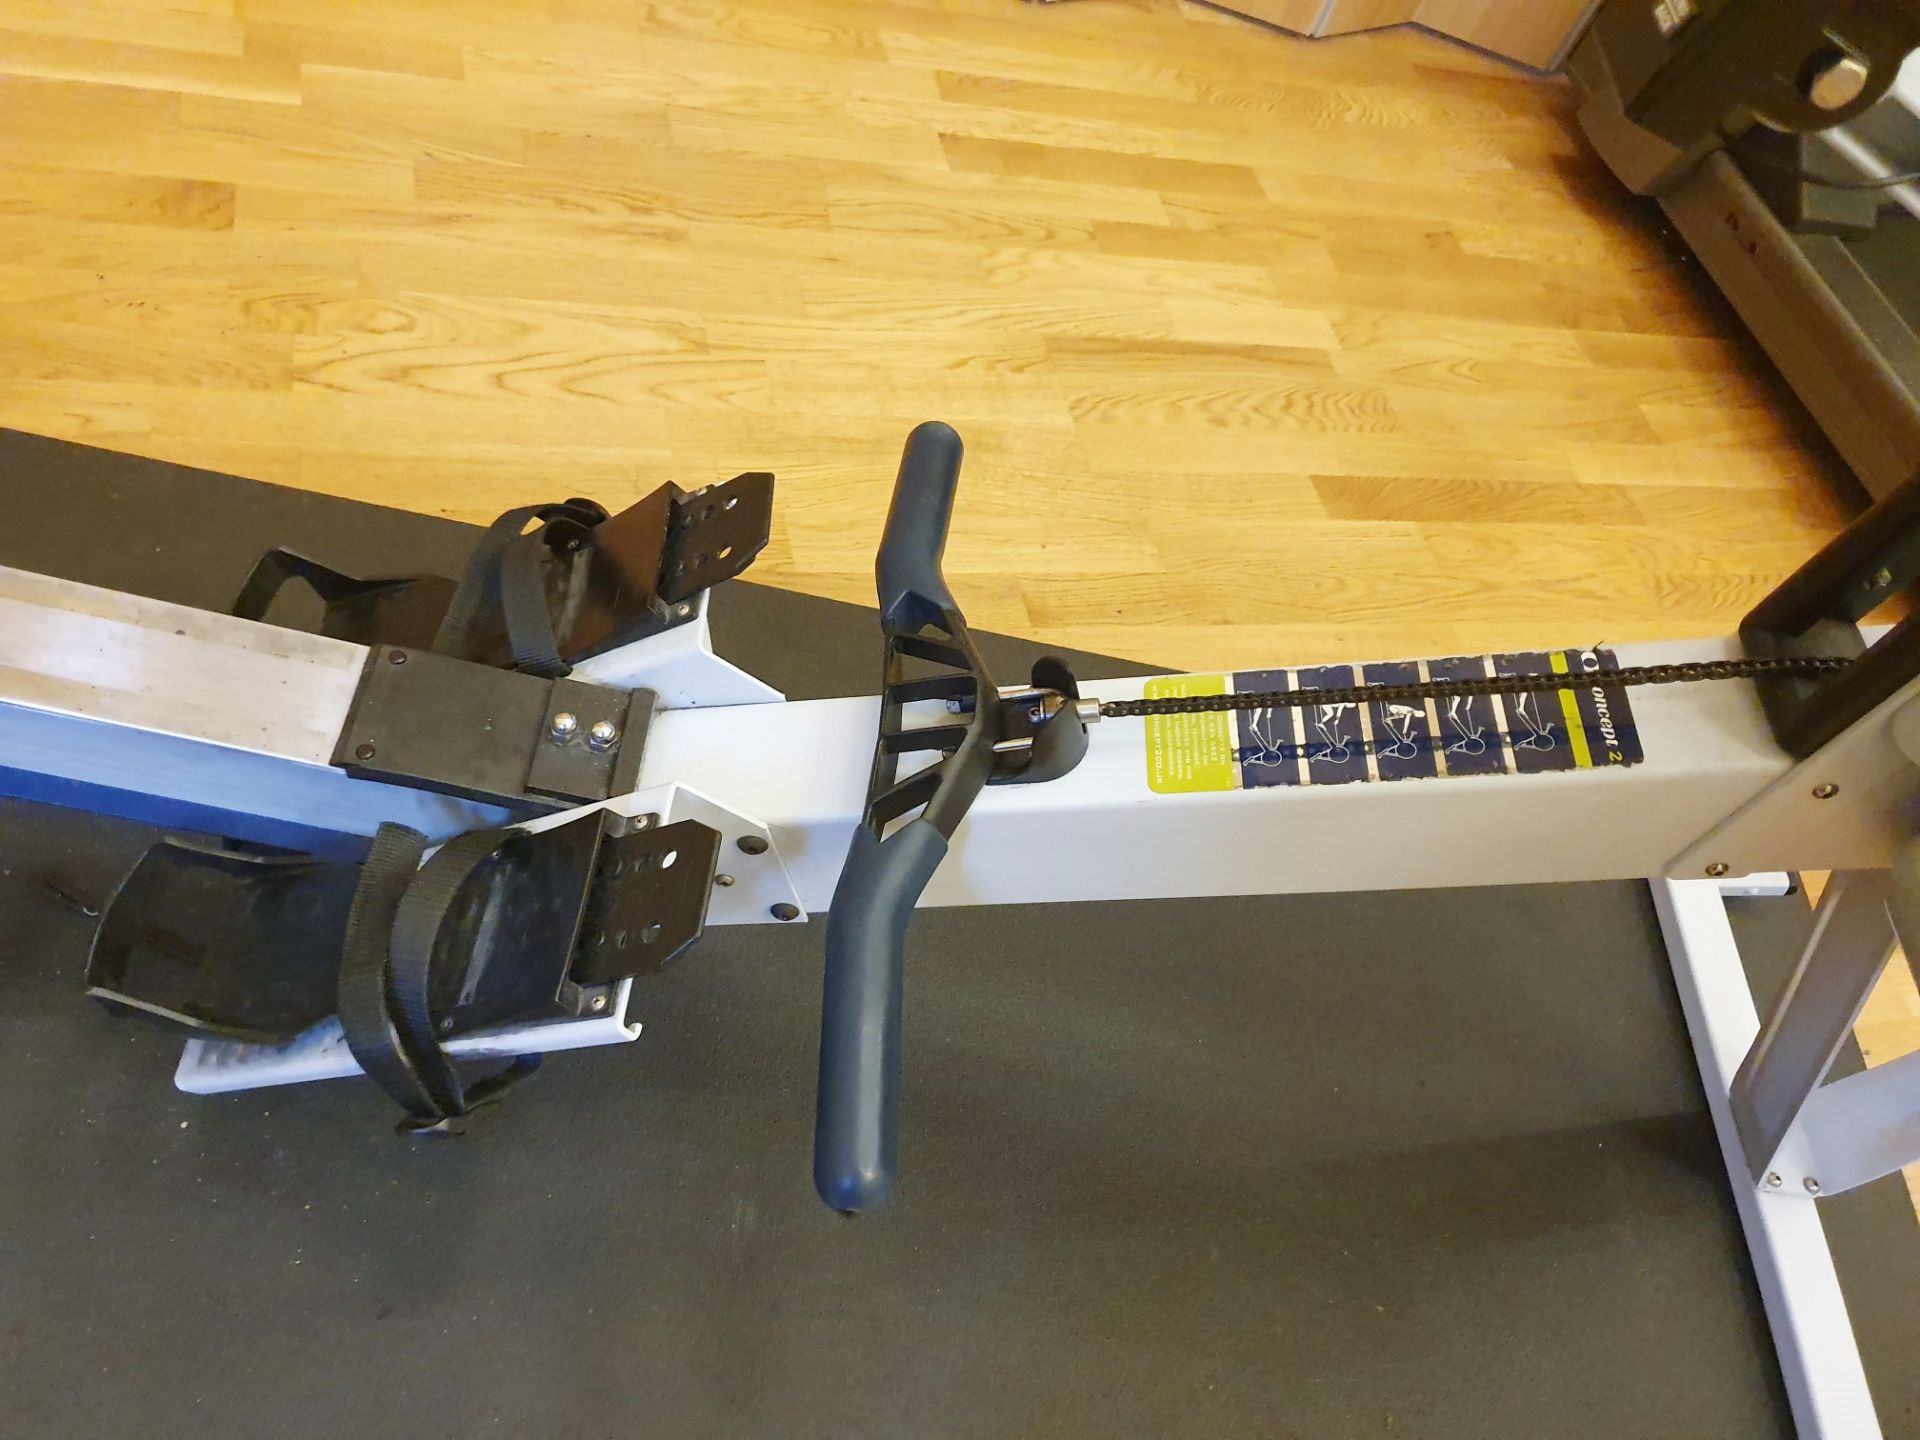 1 x Concept 2 Indoor Rowing Machine With PM3 Performance Monitor and Anti Slip Mat - CL552 - - Image 4 of 6